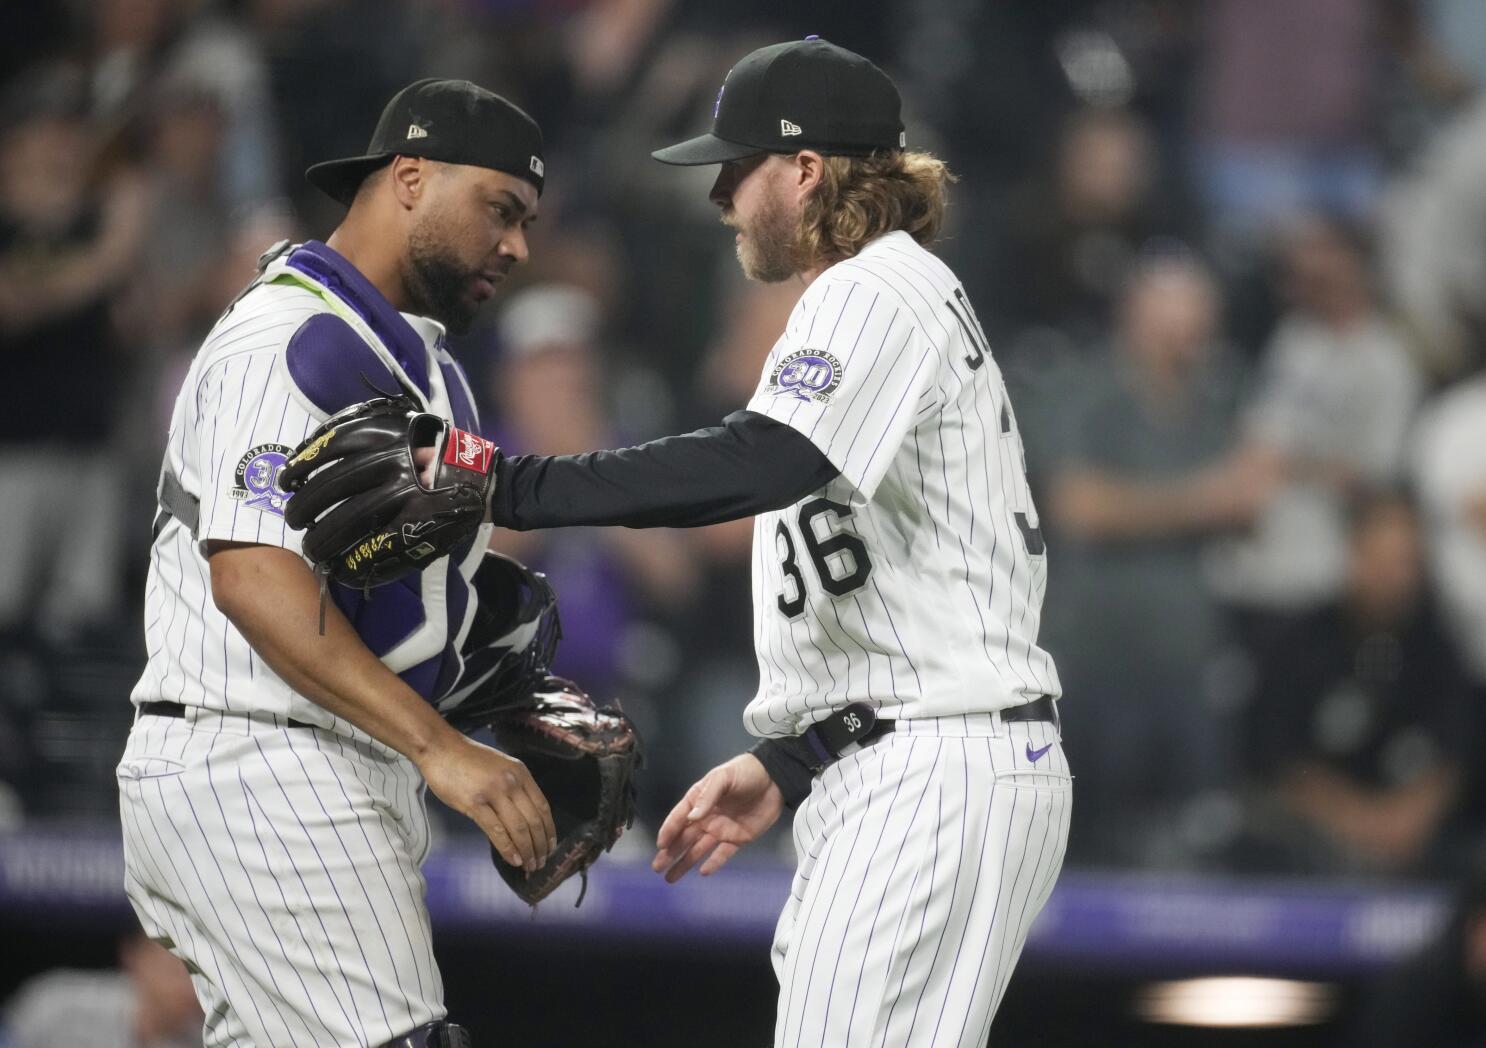 Grichuk's go-ahead RBI single in the ninth rallies Rockies past Marlins 4-3